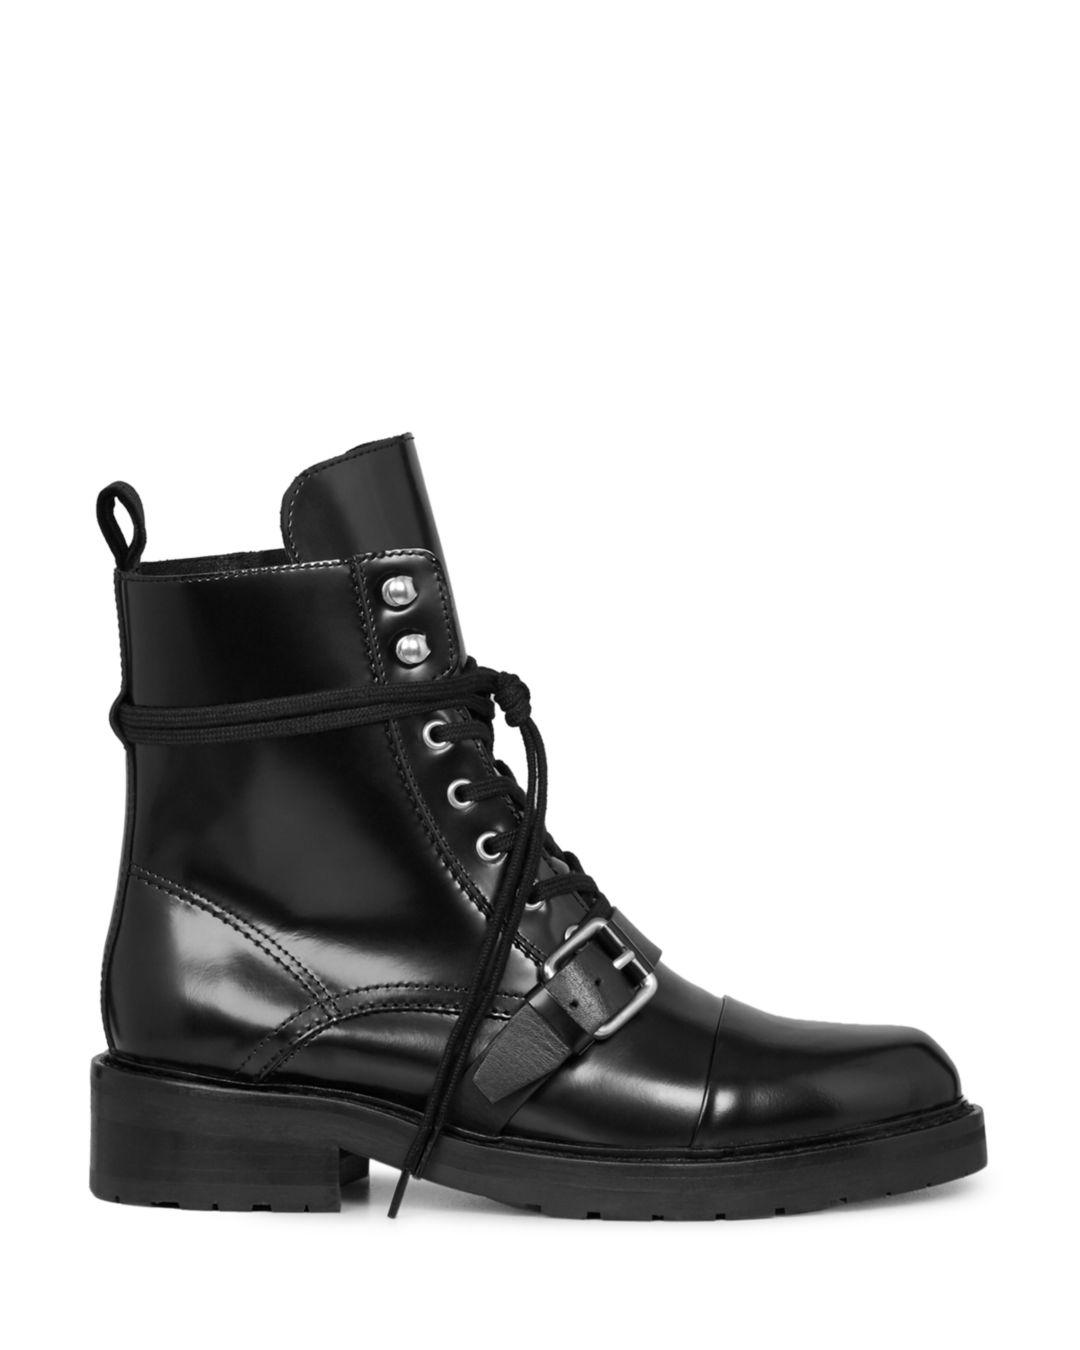 AllSaints Women's Donita Leather Lace Up Combat Boots in Black - Lyst